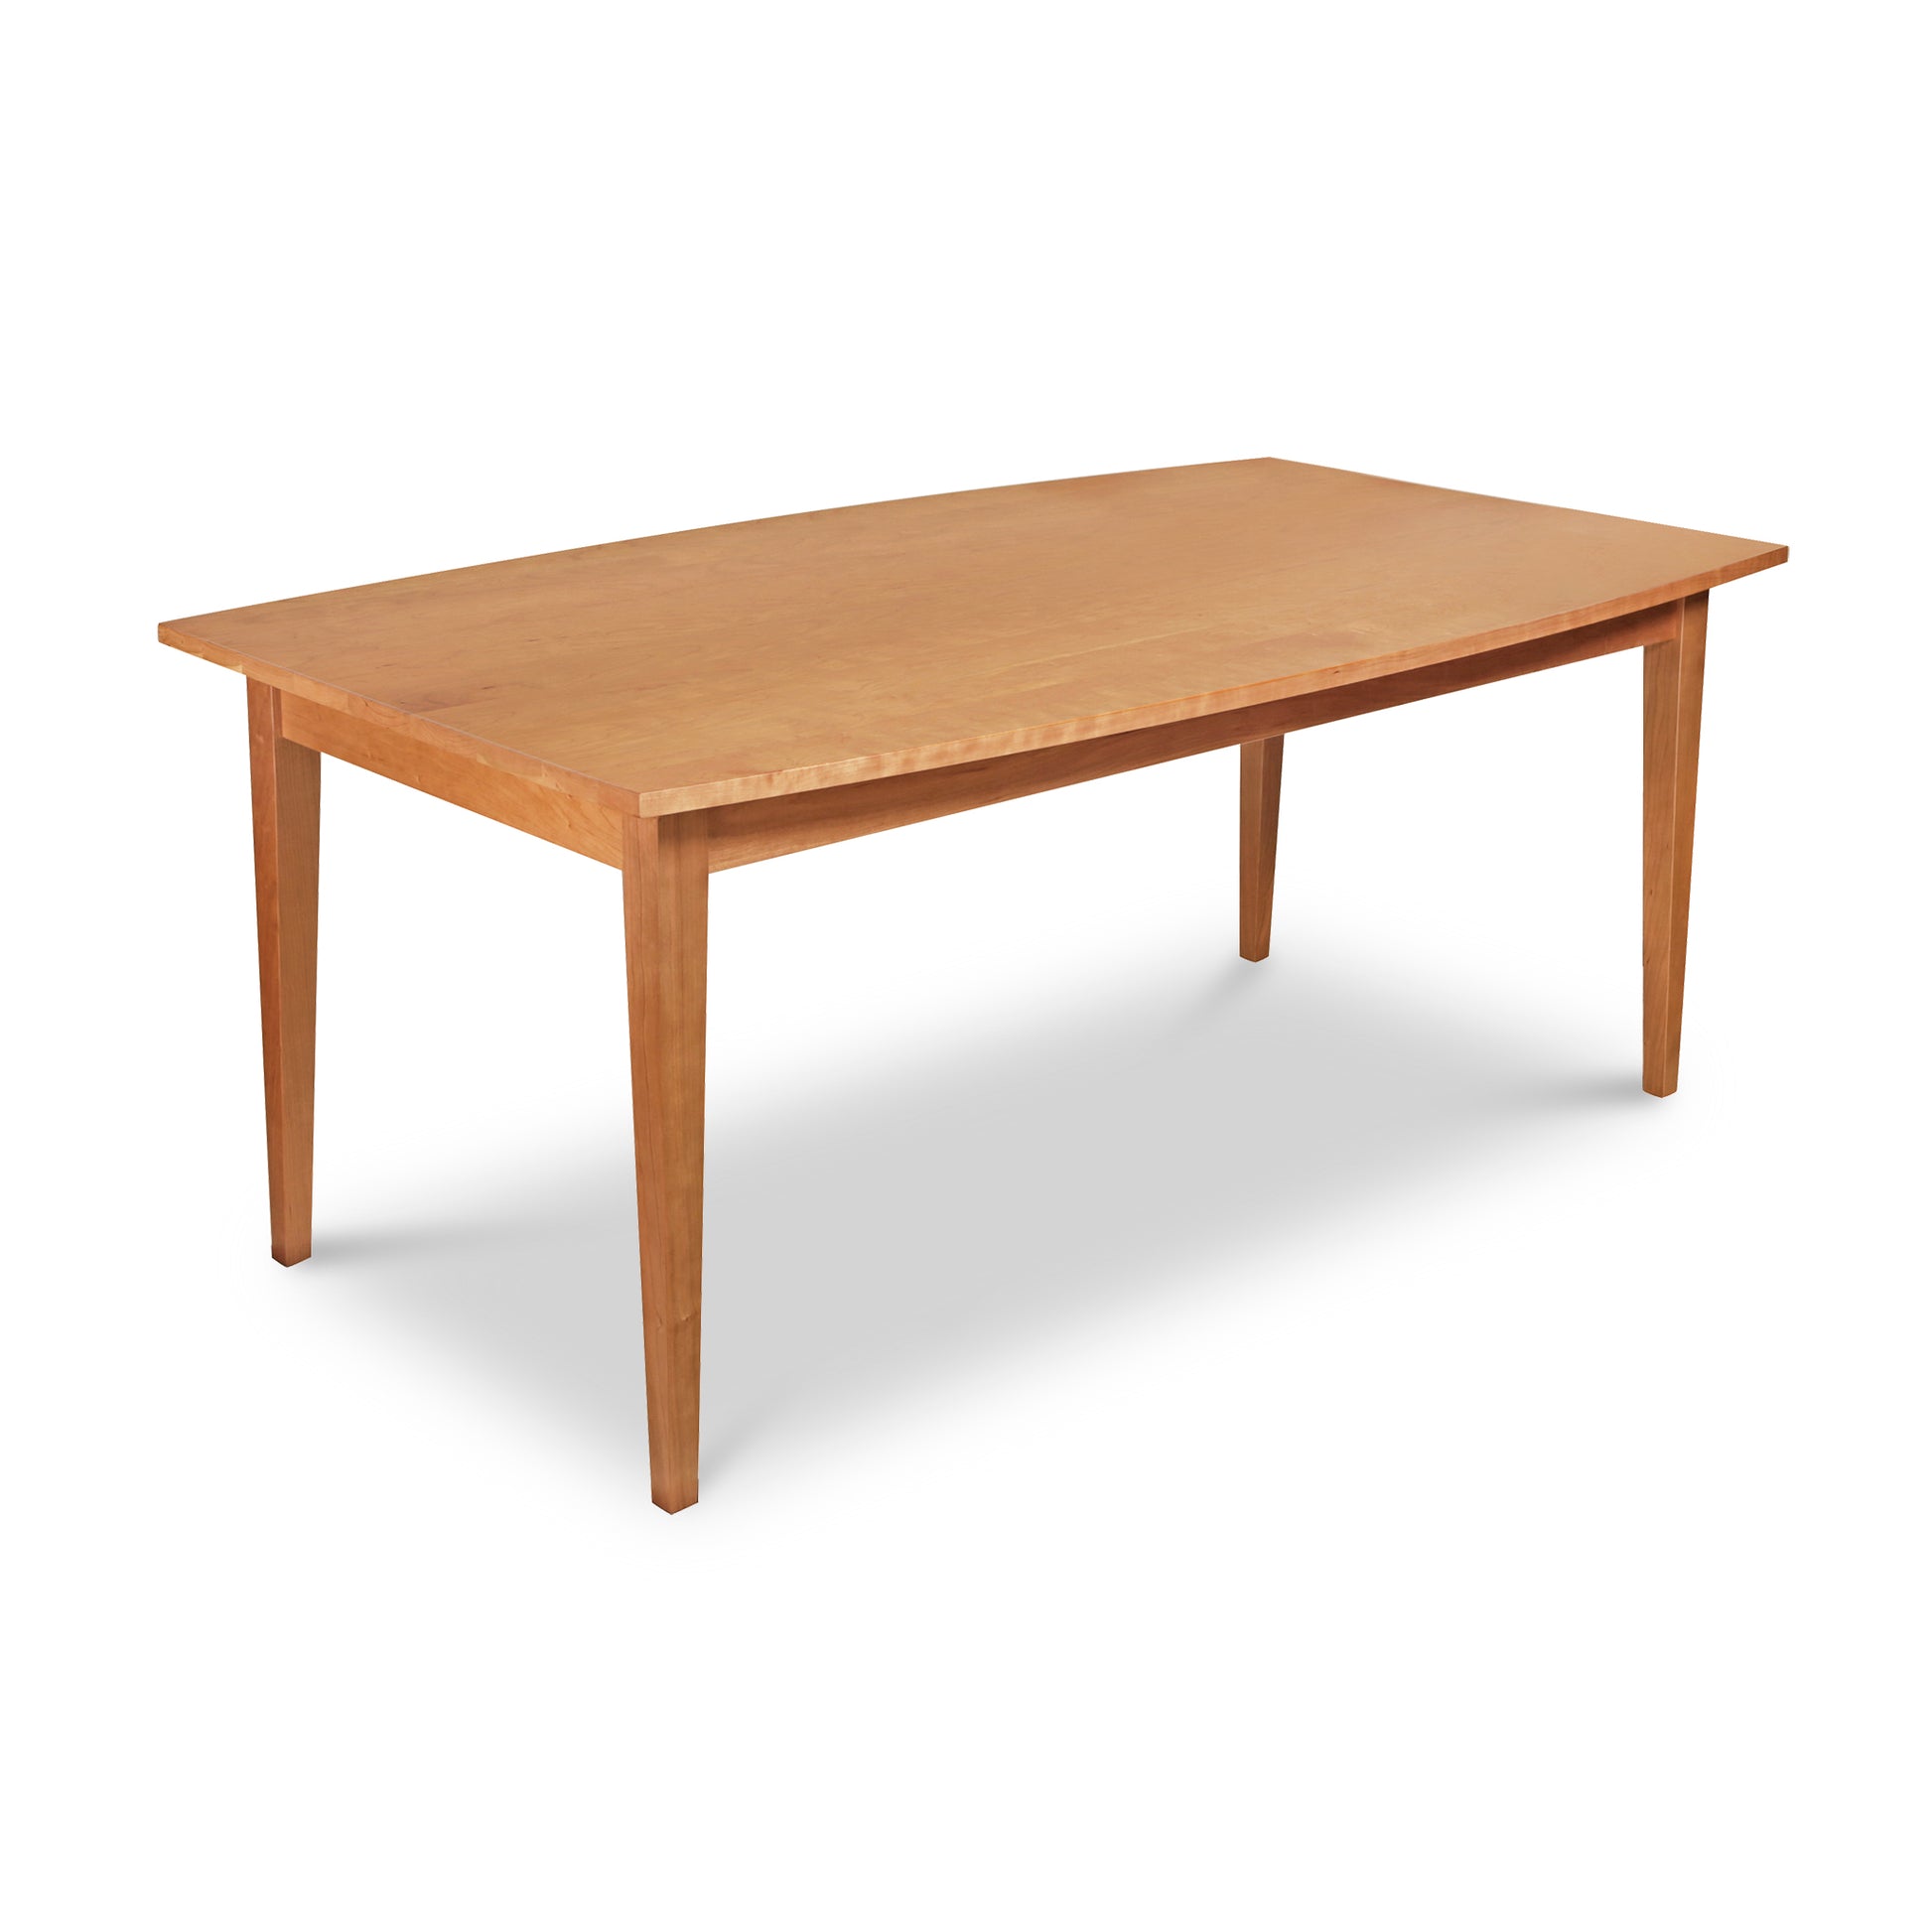 A Classic Shaker Solid Boat Top Table by Lyndon Furniture made of solid hardwood on a white background.